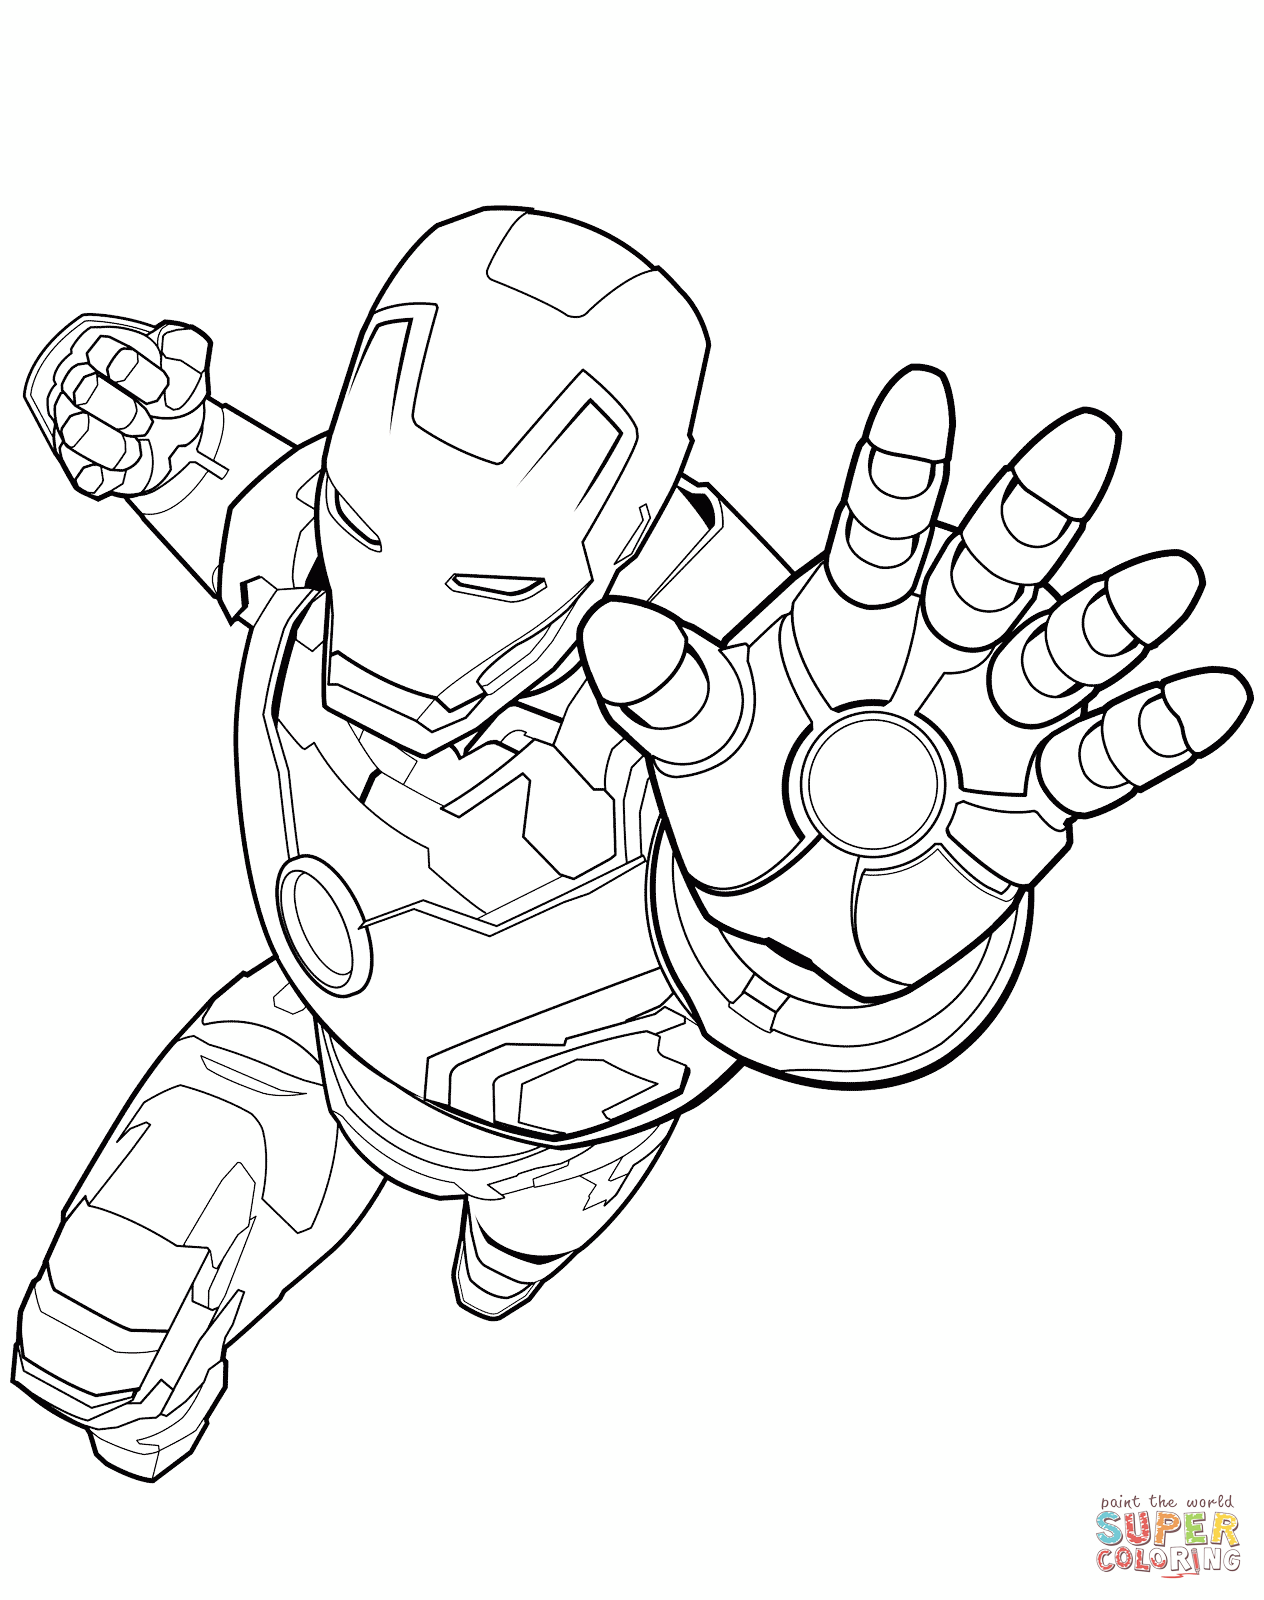 Captain Marvel Coloring Pages at GetColorings.com | Free printable